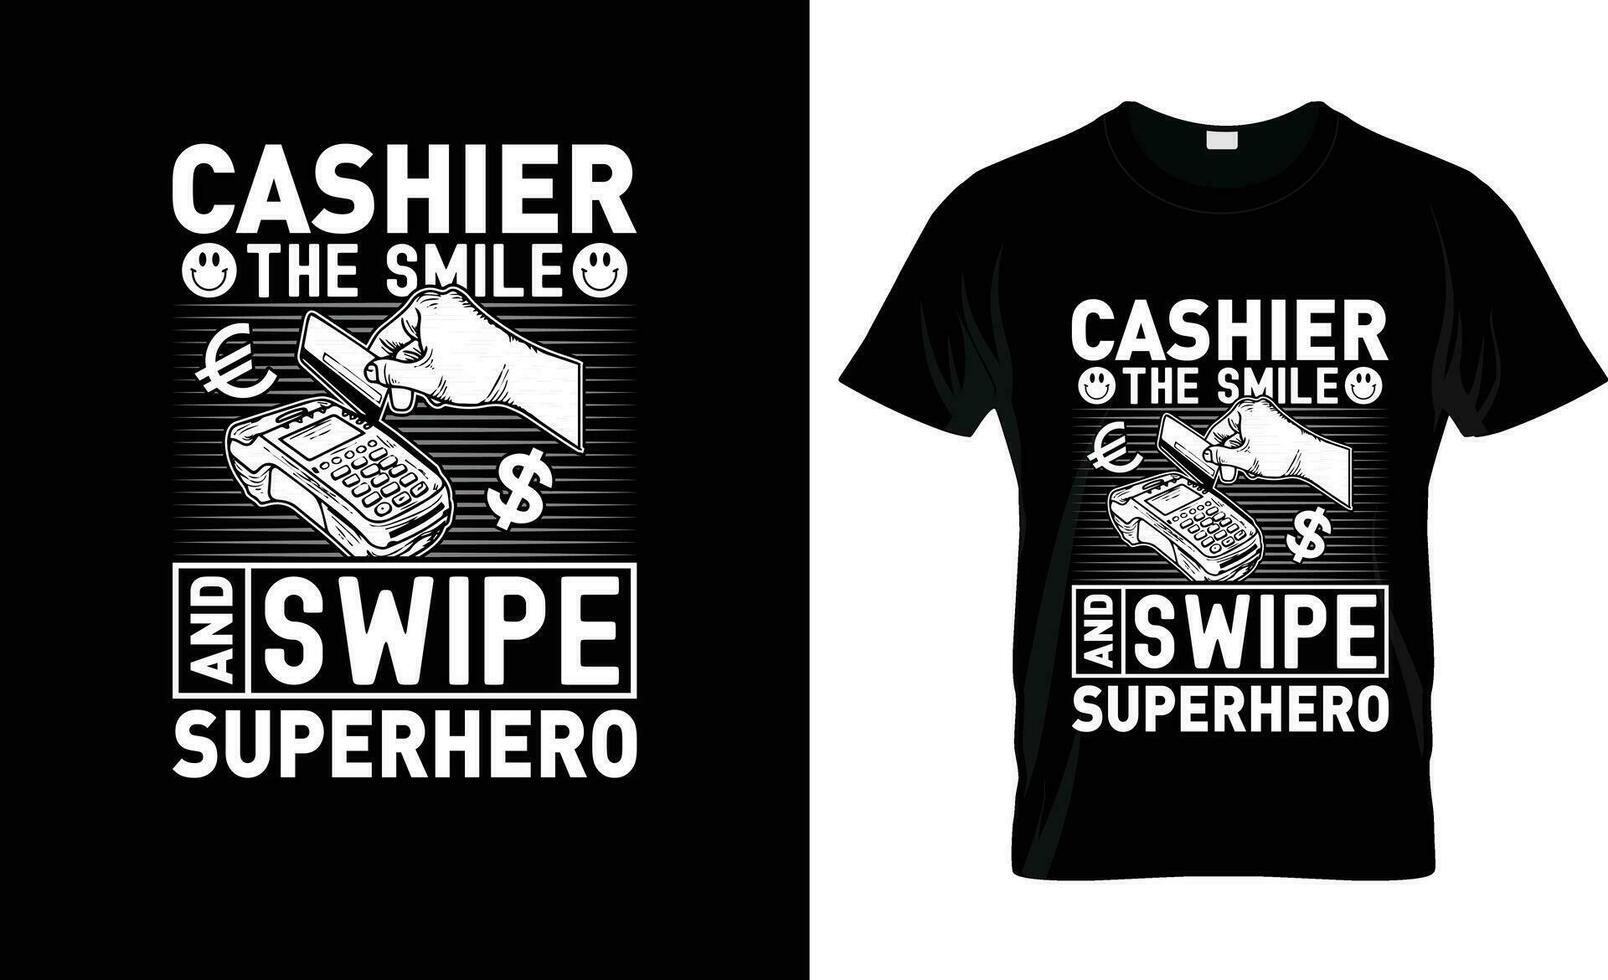 cashier the smile and swipe superhero colorful Graphic T-Shirt,  t-shirt print mockup vector